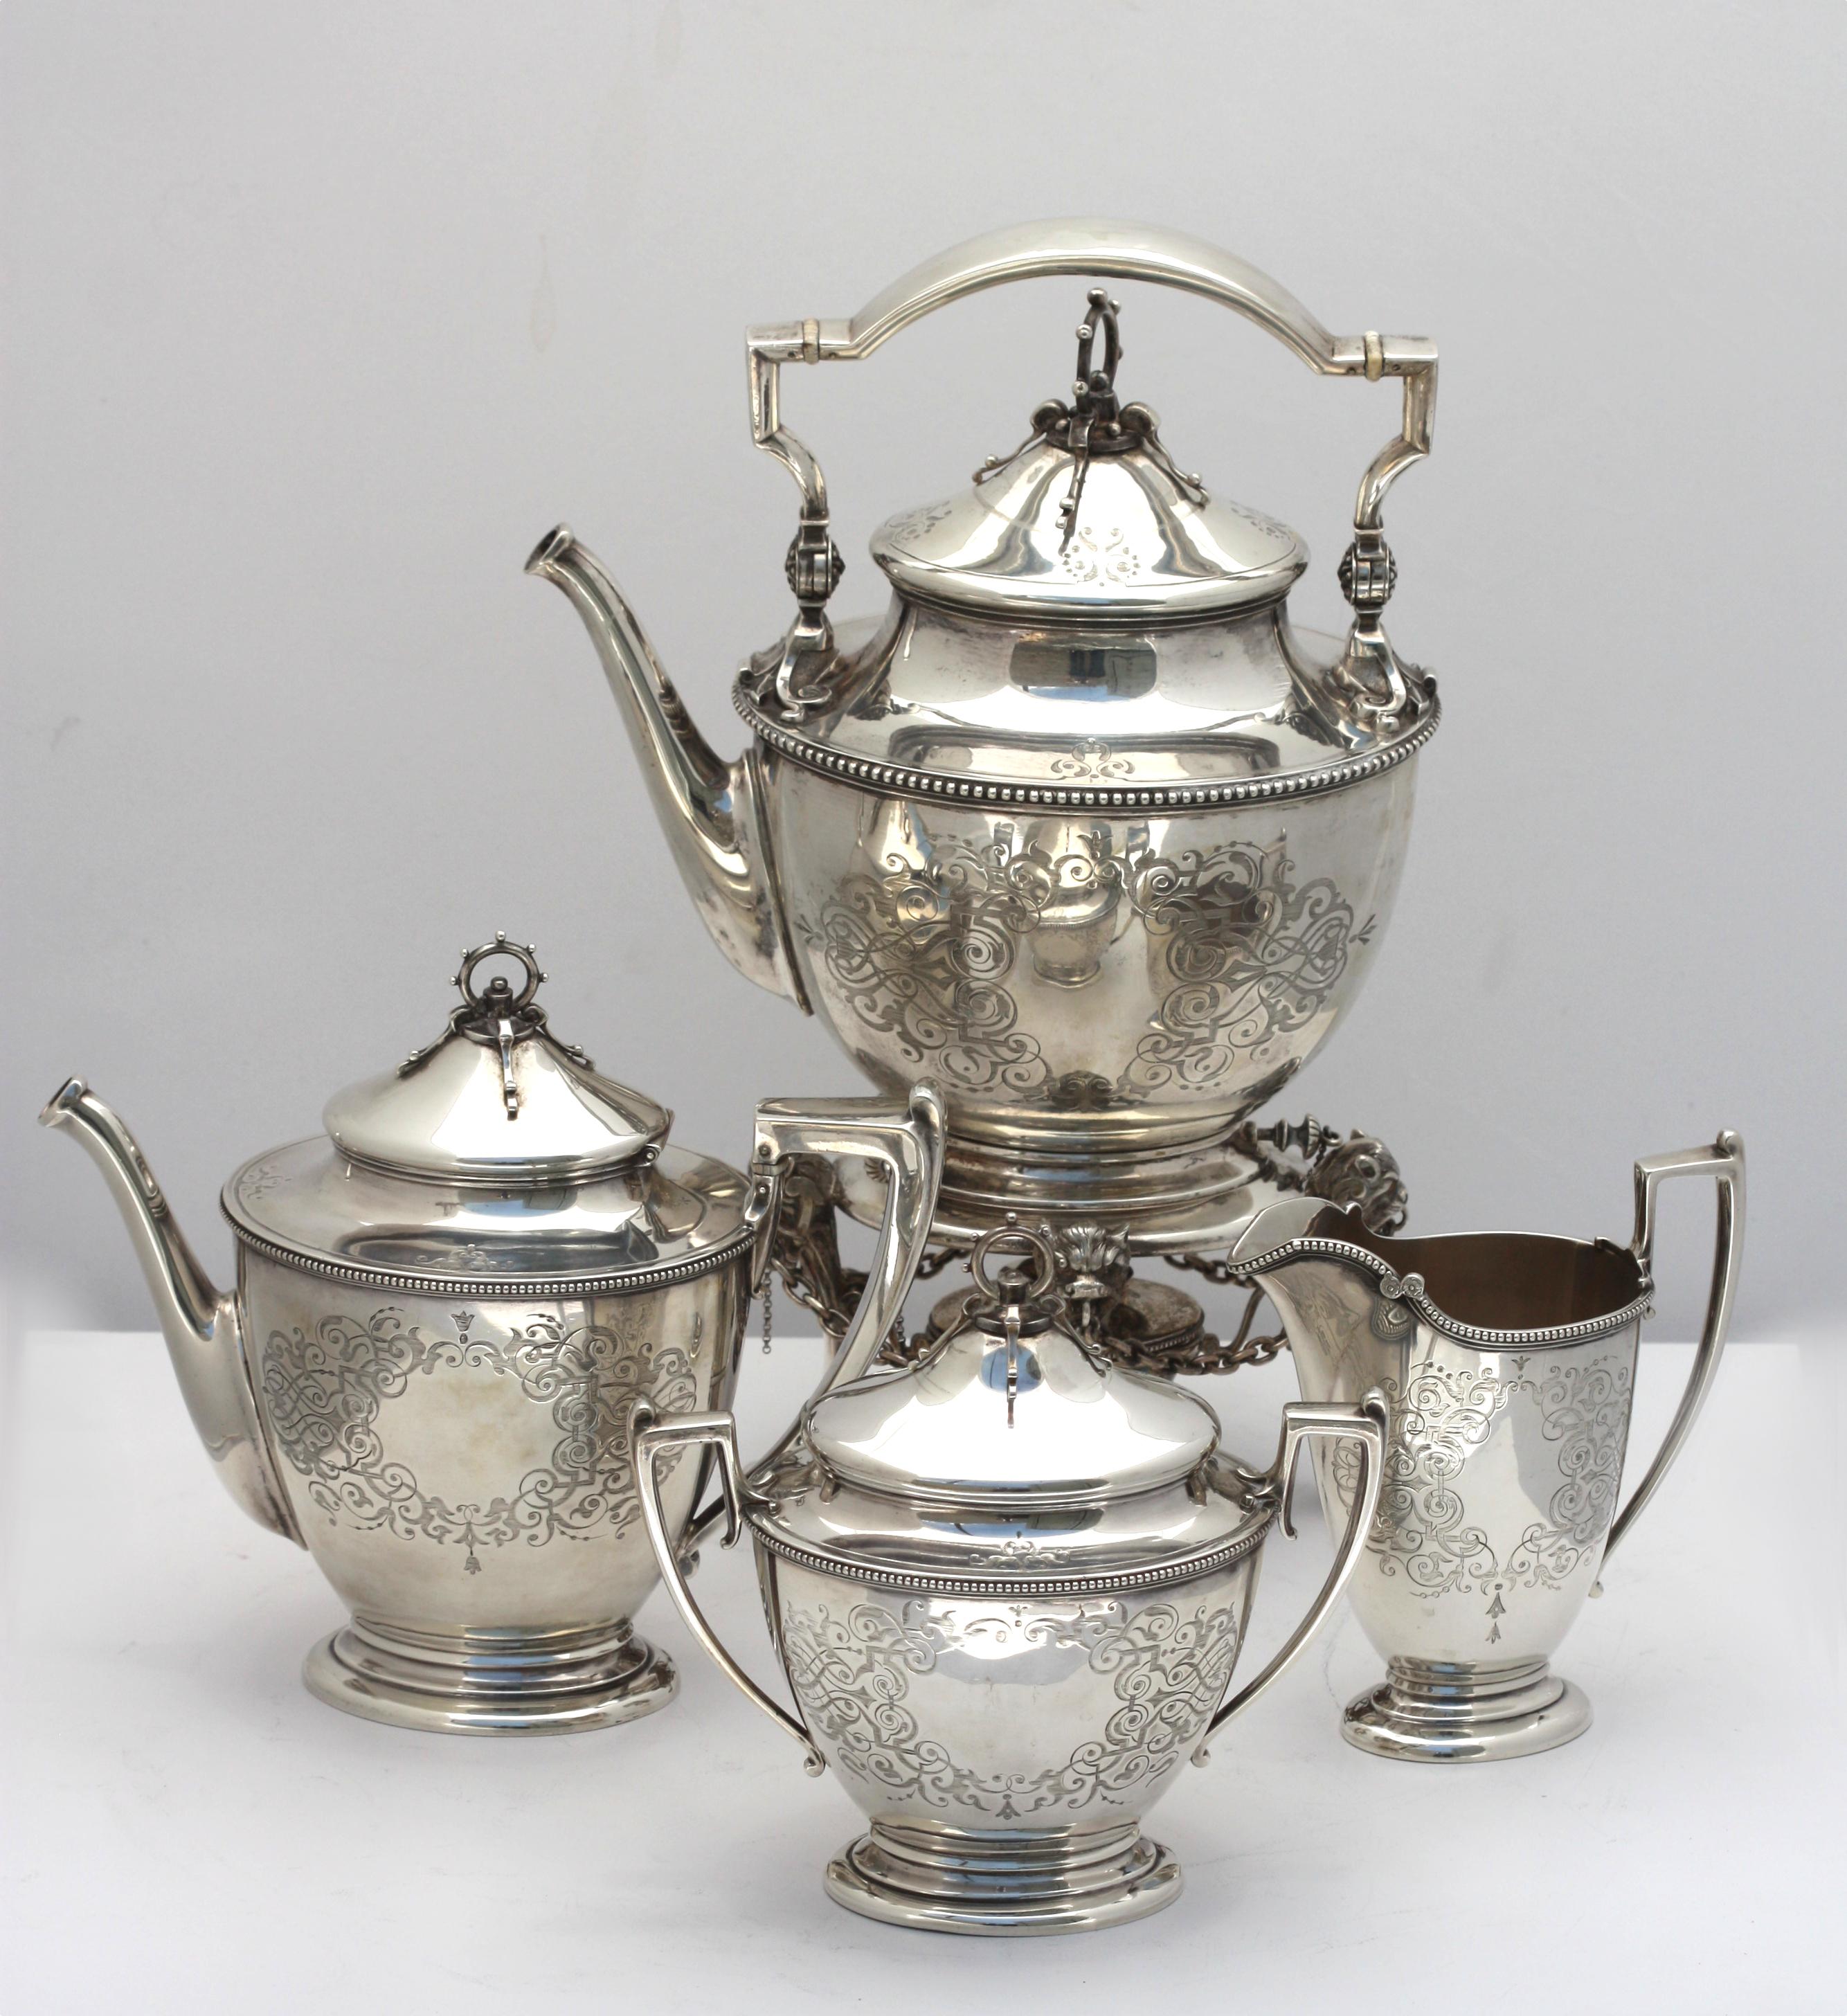 
American Coin Silver Four-Piece Tea Service with an English Silver Plate Tray
1860-1876. Each piece marked Ball, Black & Co.,
New York, 925 over 1000 in a shield, probable maker, John R. Wendt.
Comprising: teapot, creamer, covered sugar bowl, and